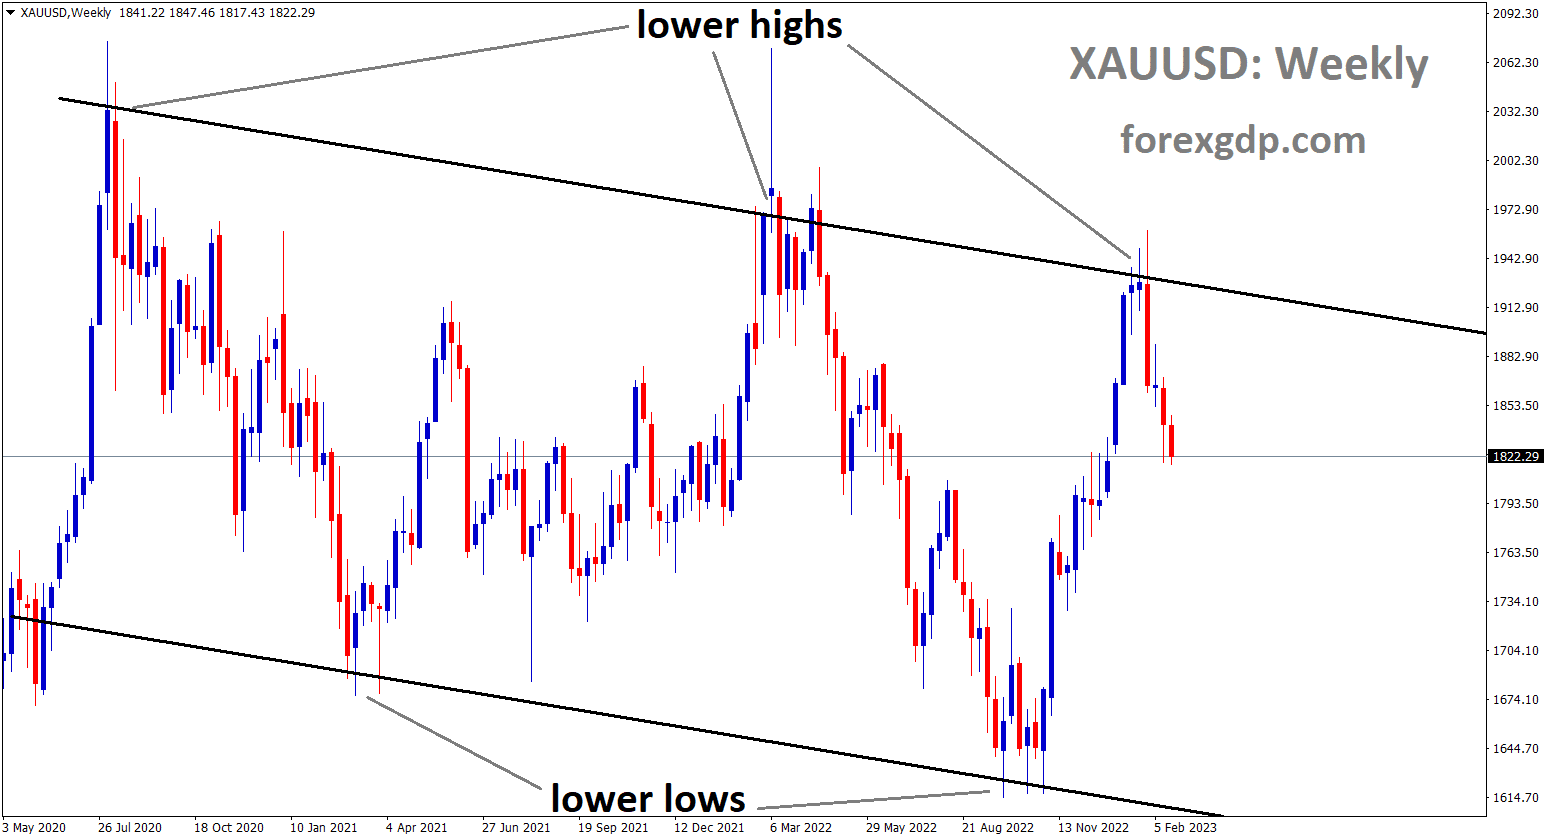 XAUUSD is moving in a Descending channel and the market has fallen from the lower high area of the channel.